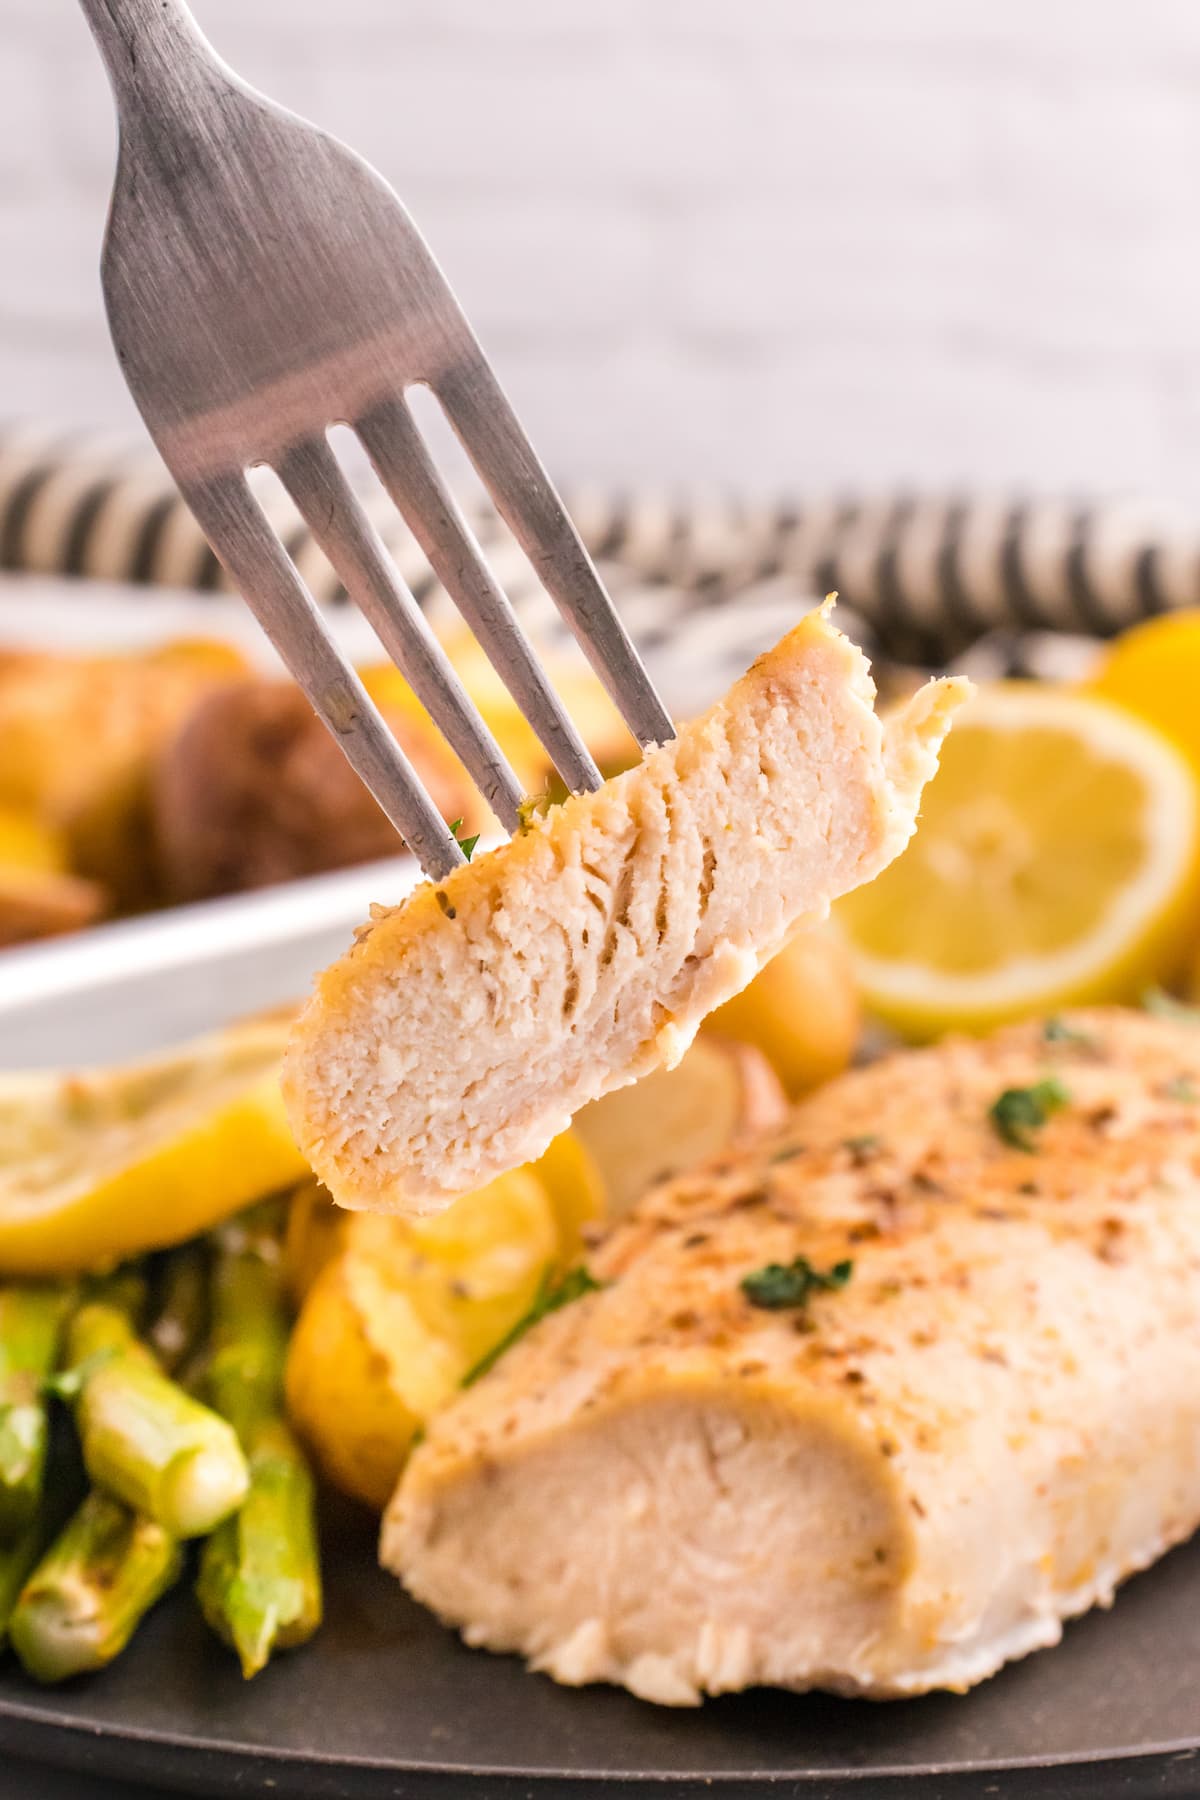 a fork with a piece of chicken on it over a plate with baked chicken breasts, potatoes, lemon slices, and asparagus on it